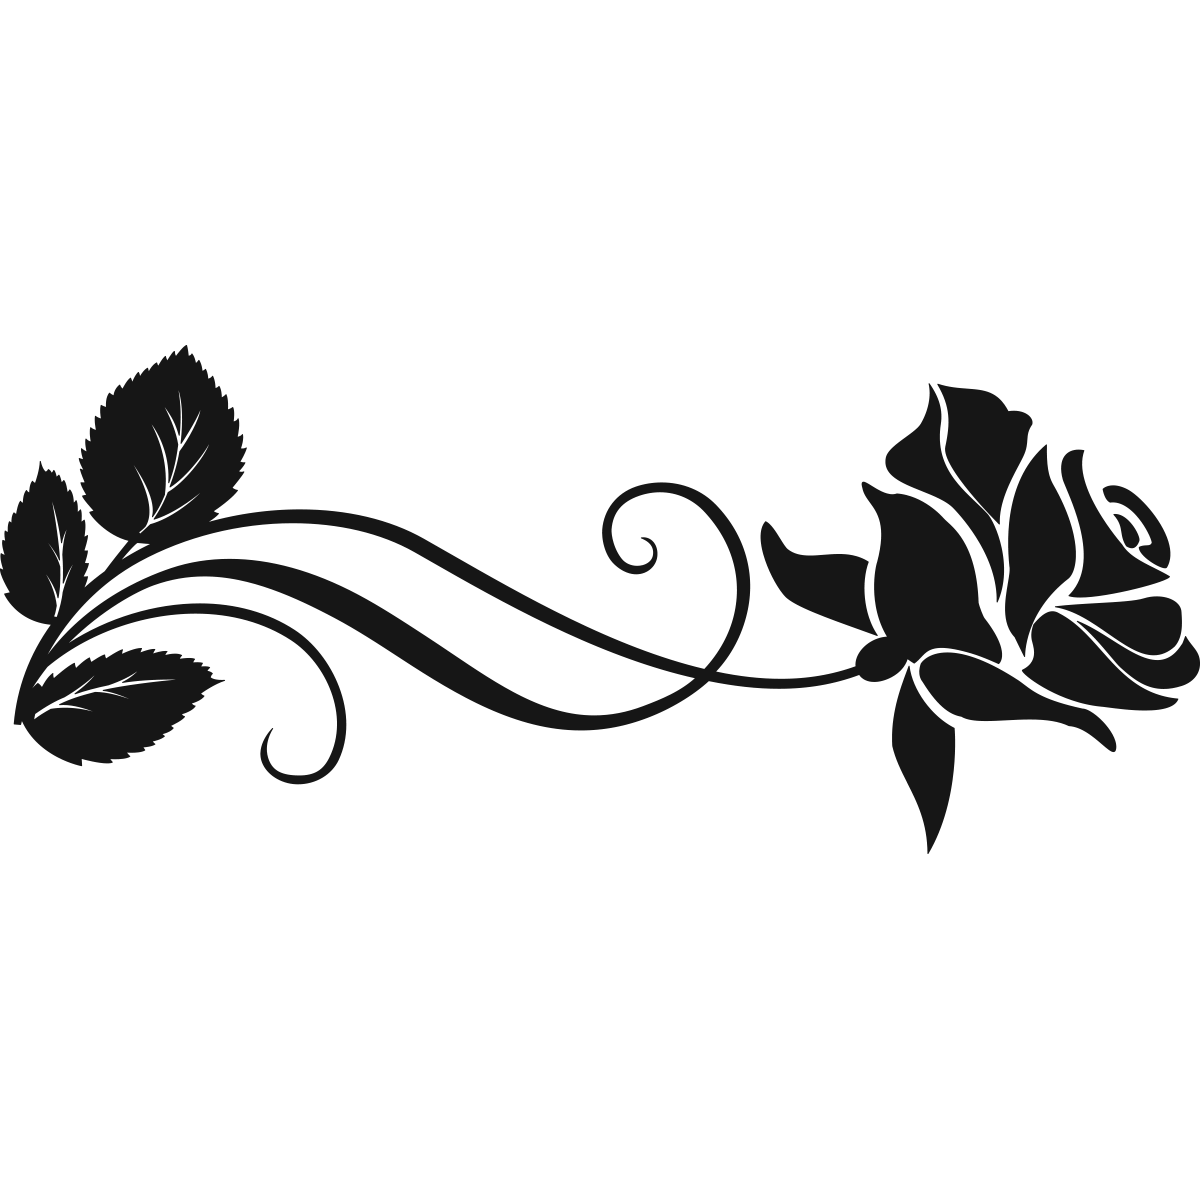 Clip art Rose Vector graphics Silhouette Flower - rose png download